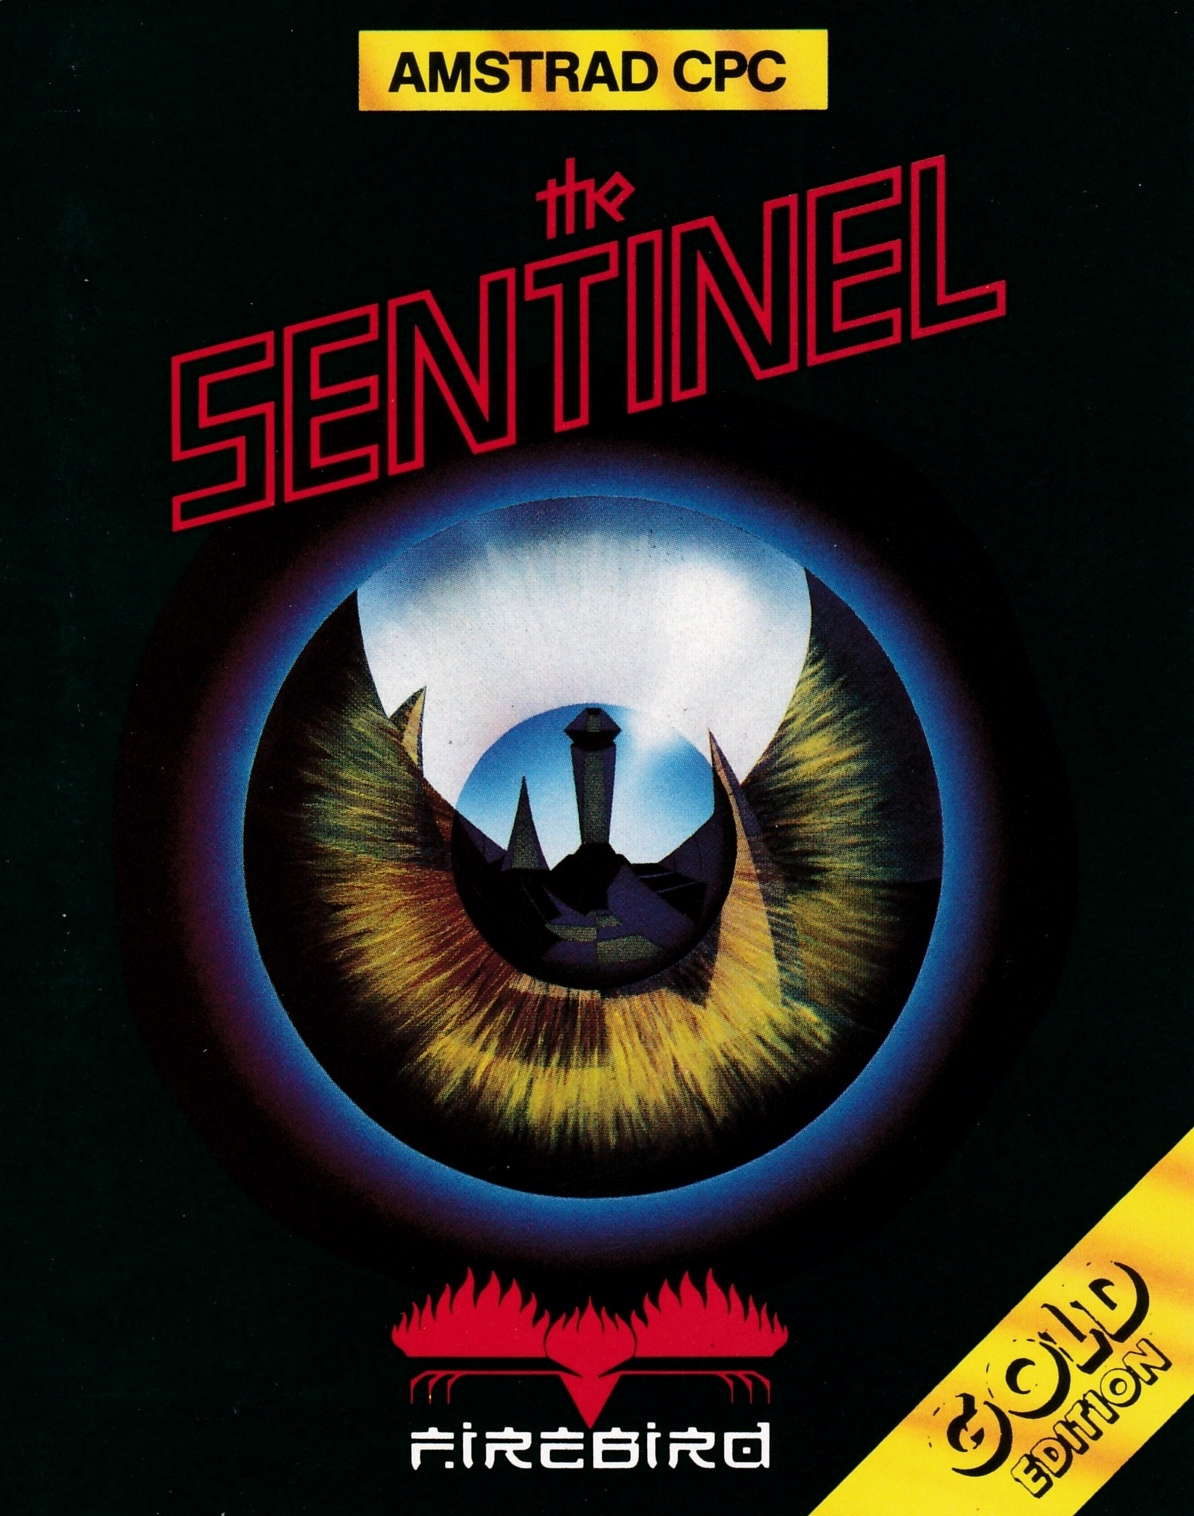 screenshot of the Amstrad CPC game Sentinel (the) by GameBase CPC